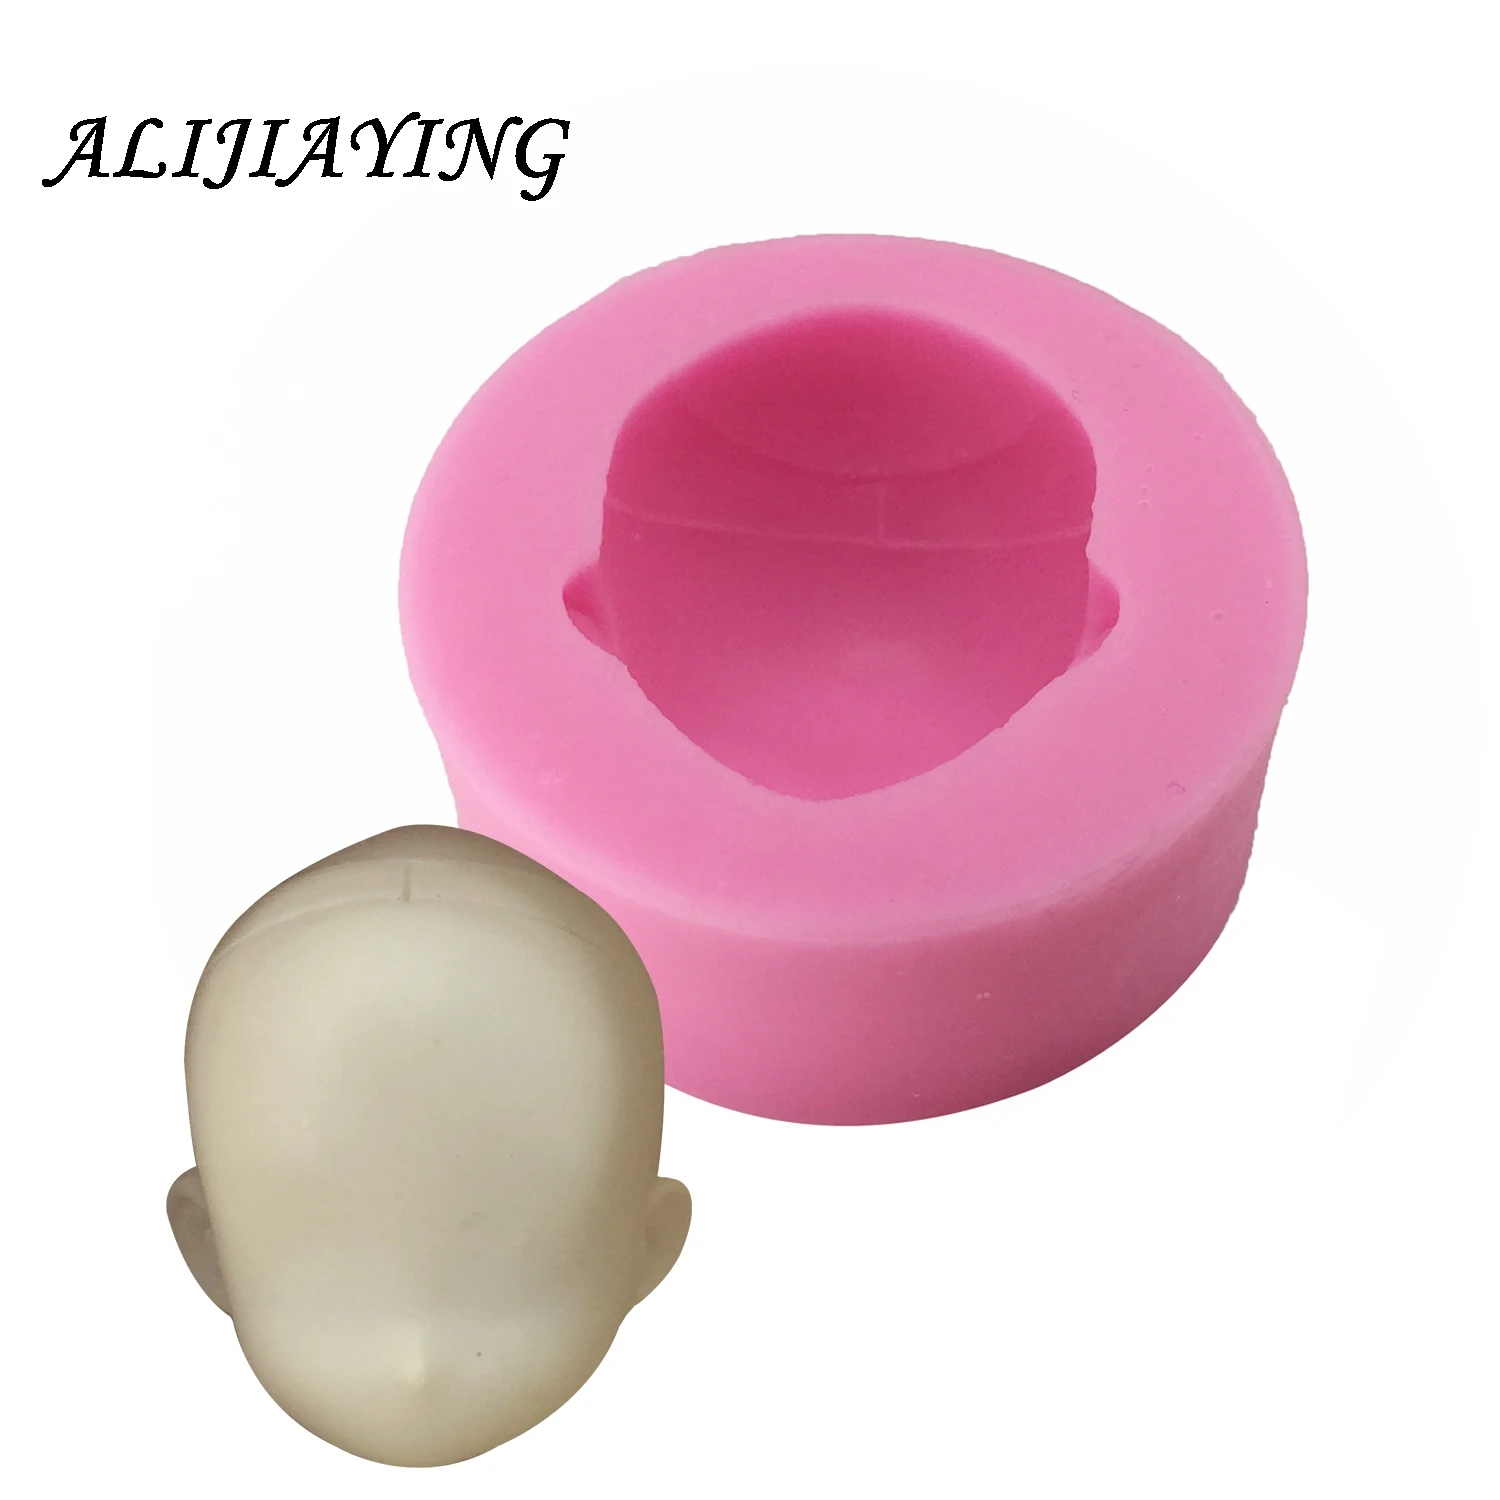 Baby Face Shape girl face cooking tools wedding decoration Silicone Mold DIY head Fondant Sugar Craft baking tools D0922